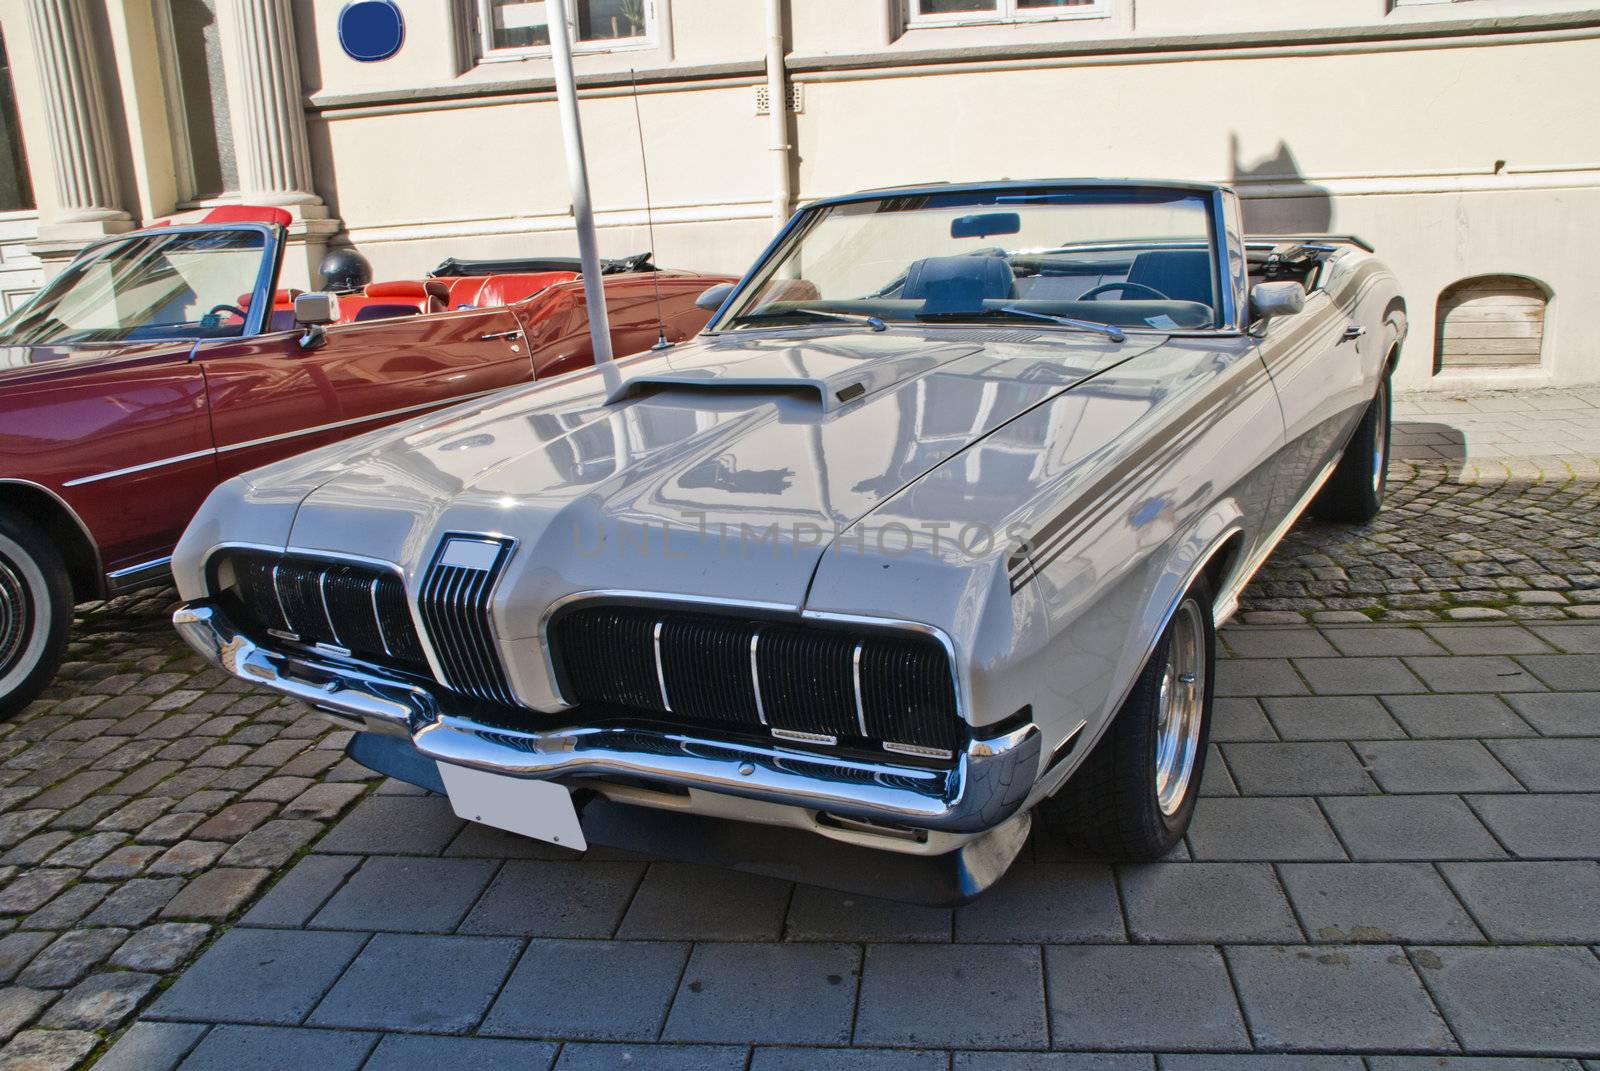 1970 mercury cougar xr7 convertible, angle 1 by steirus